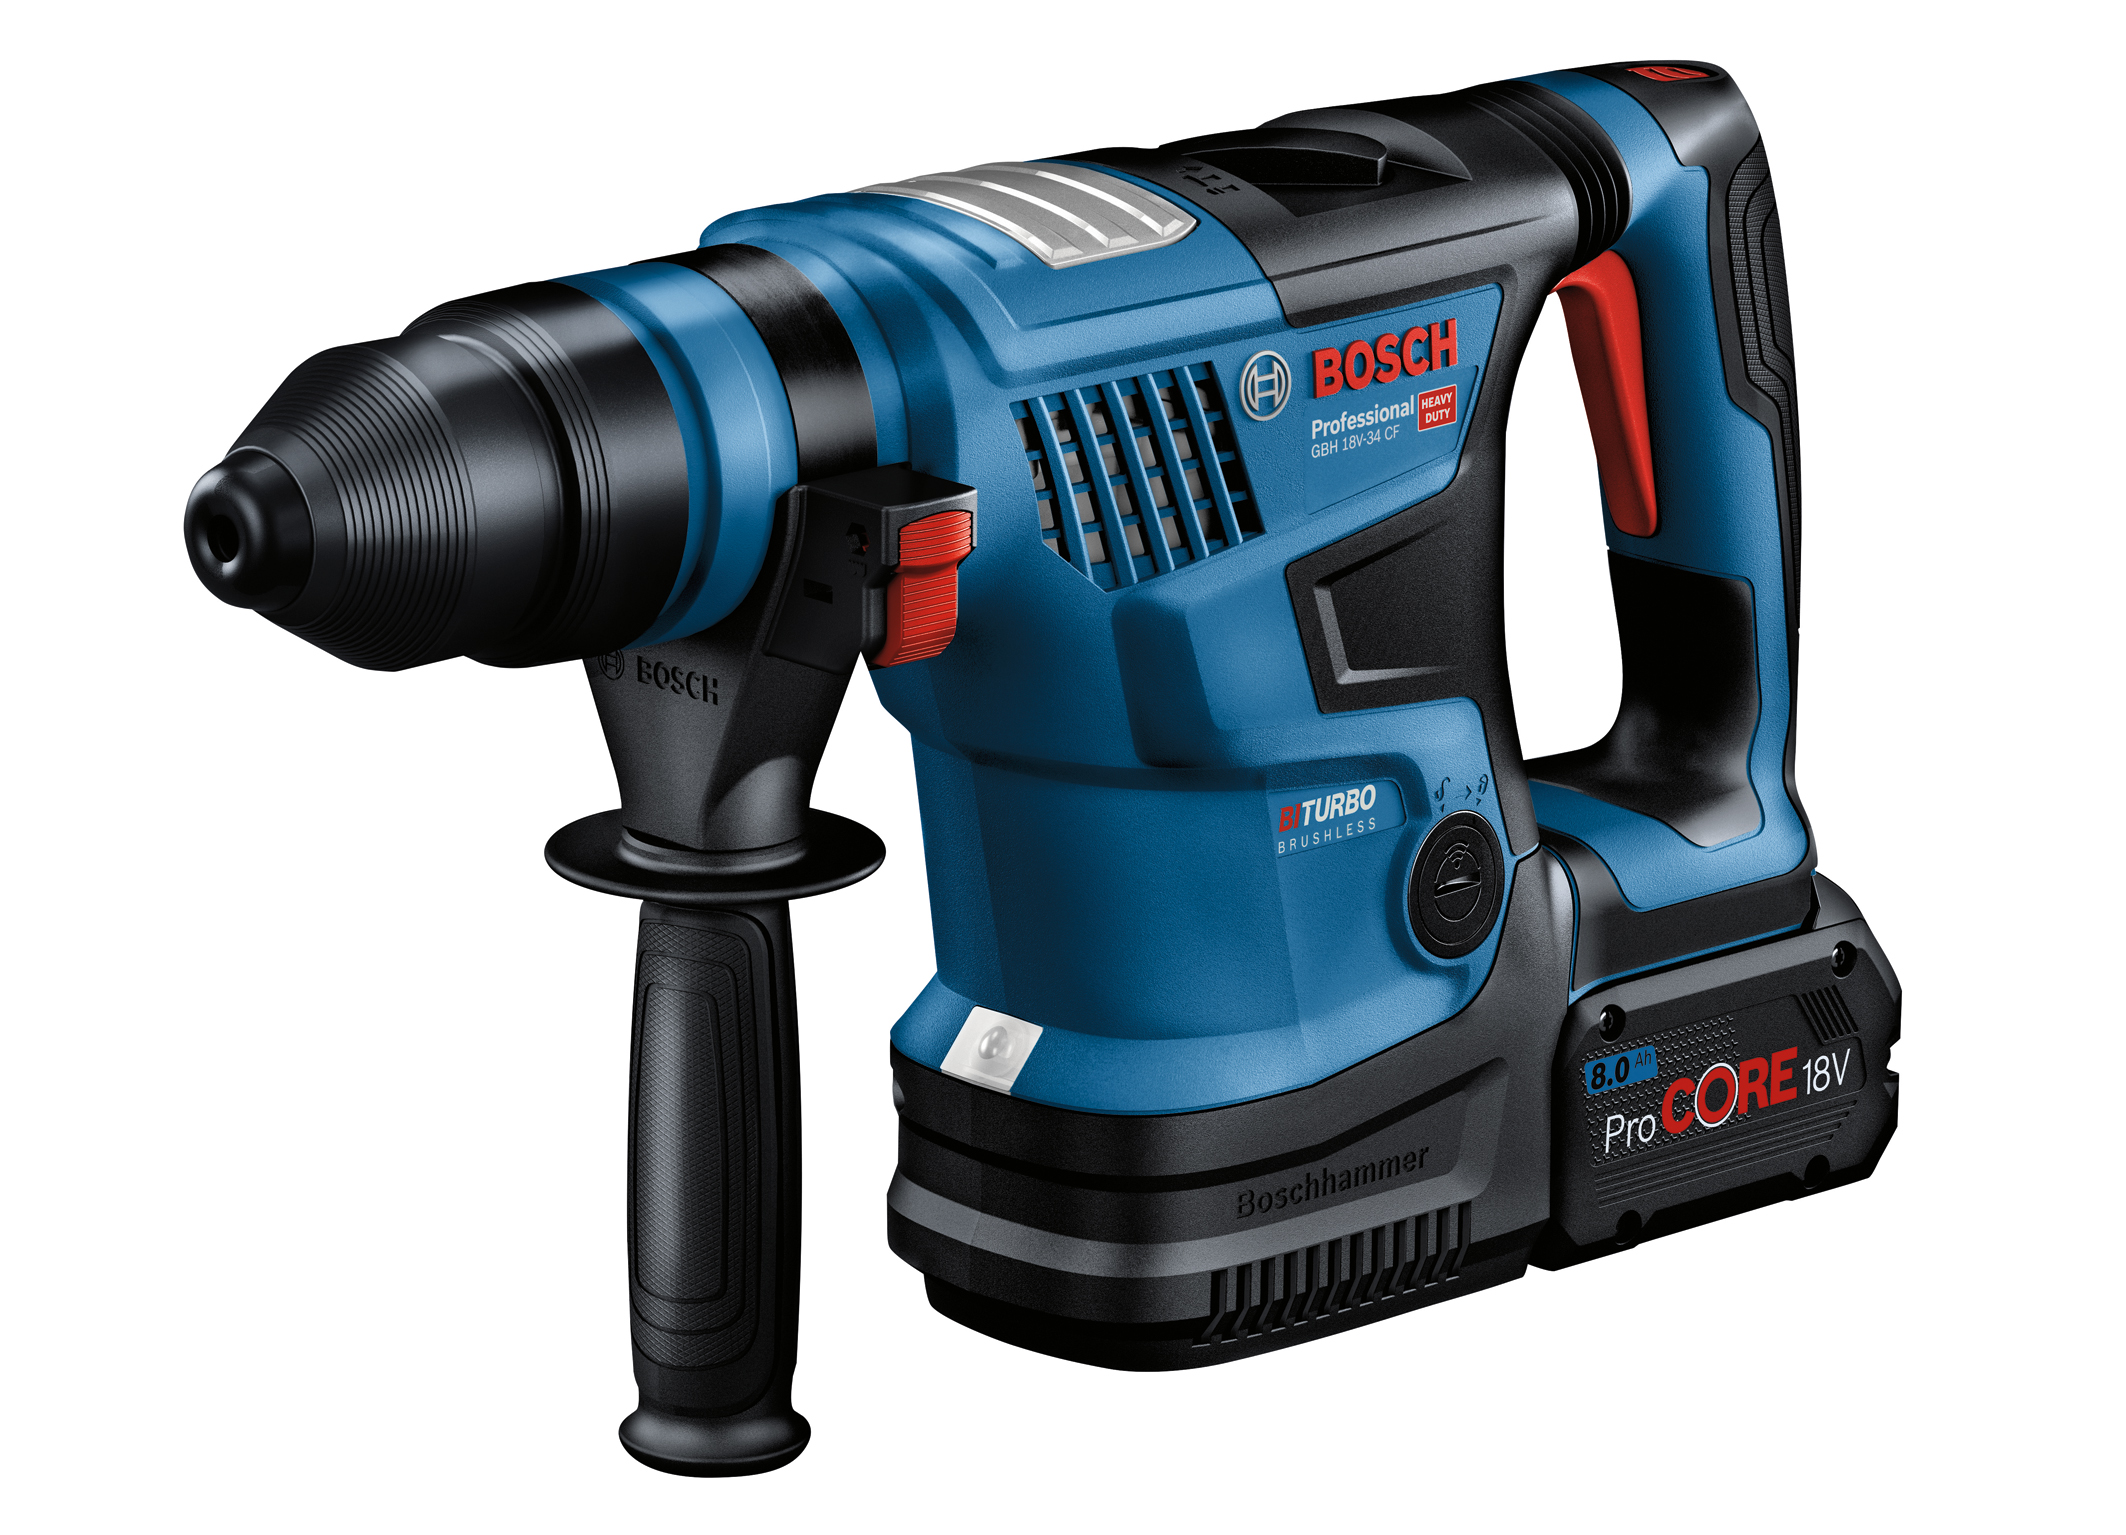 Most powerful cordless rotary hammer with SDS plus: New Biturbo hammer from Bosch for professionals